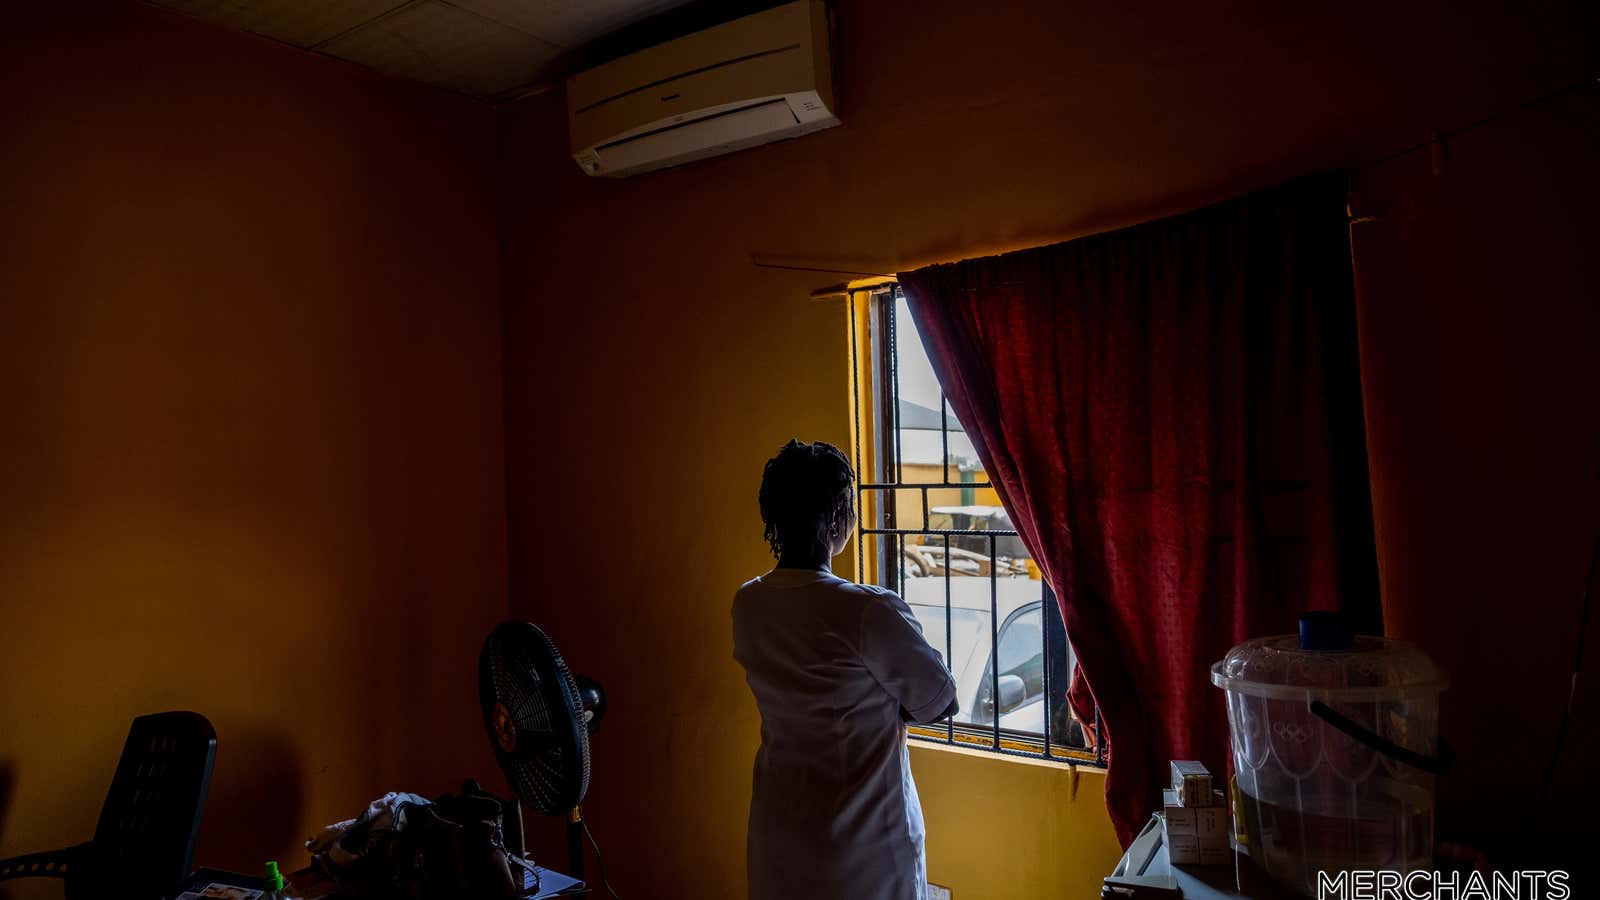 An exodus of nurses has caused a “medical brain drain” in Nigeria. Are rich countries to blame?